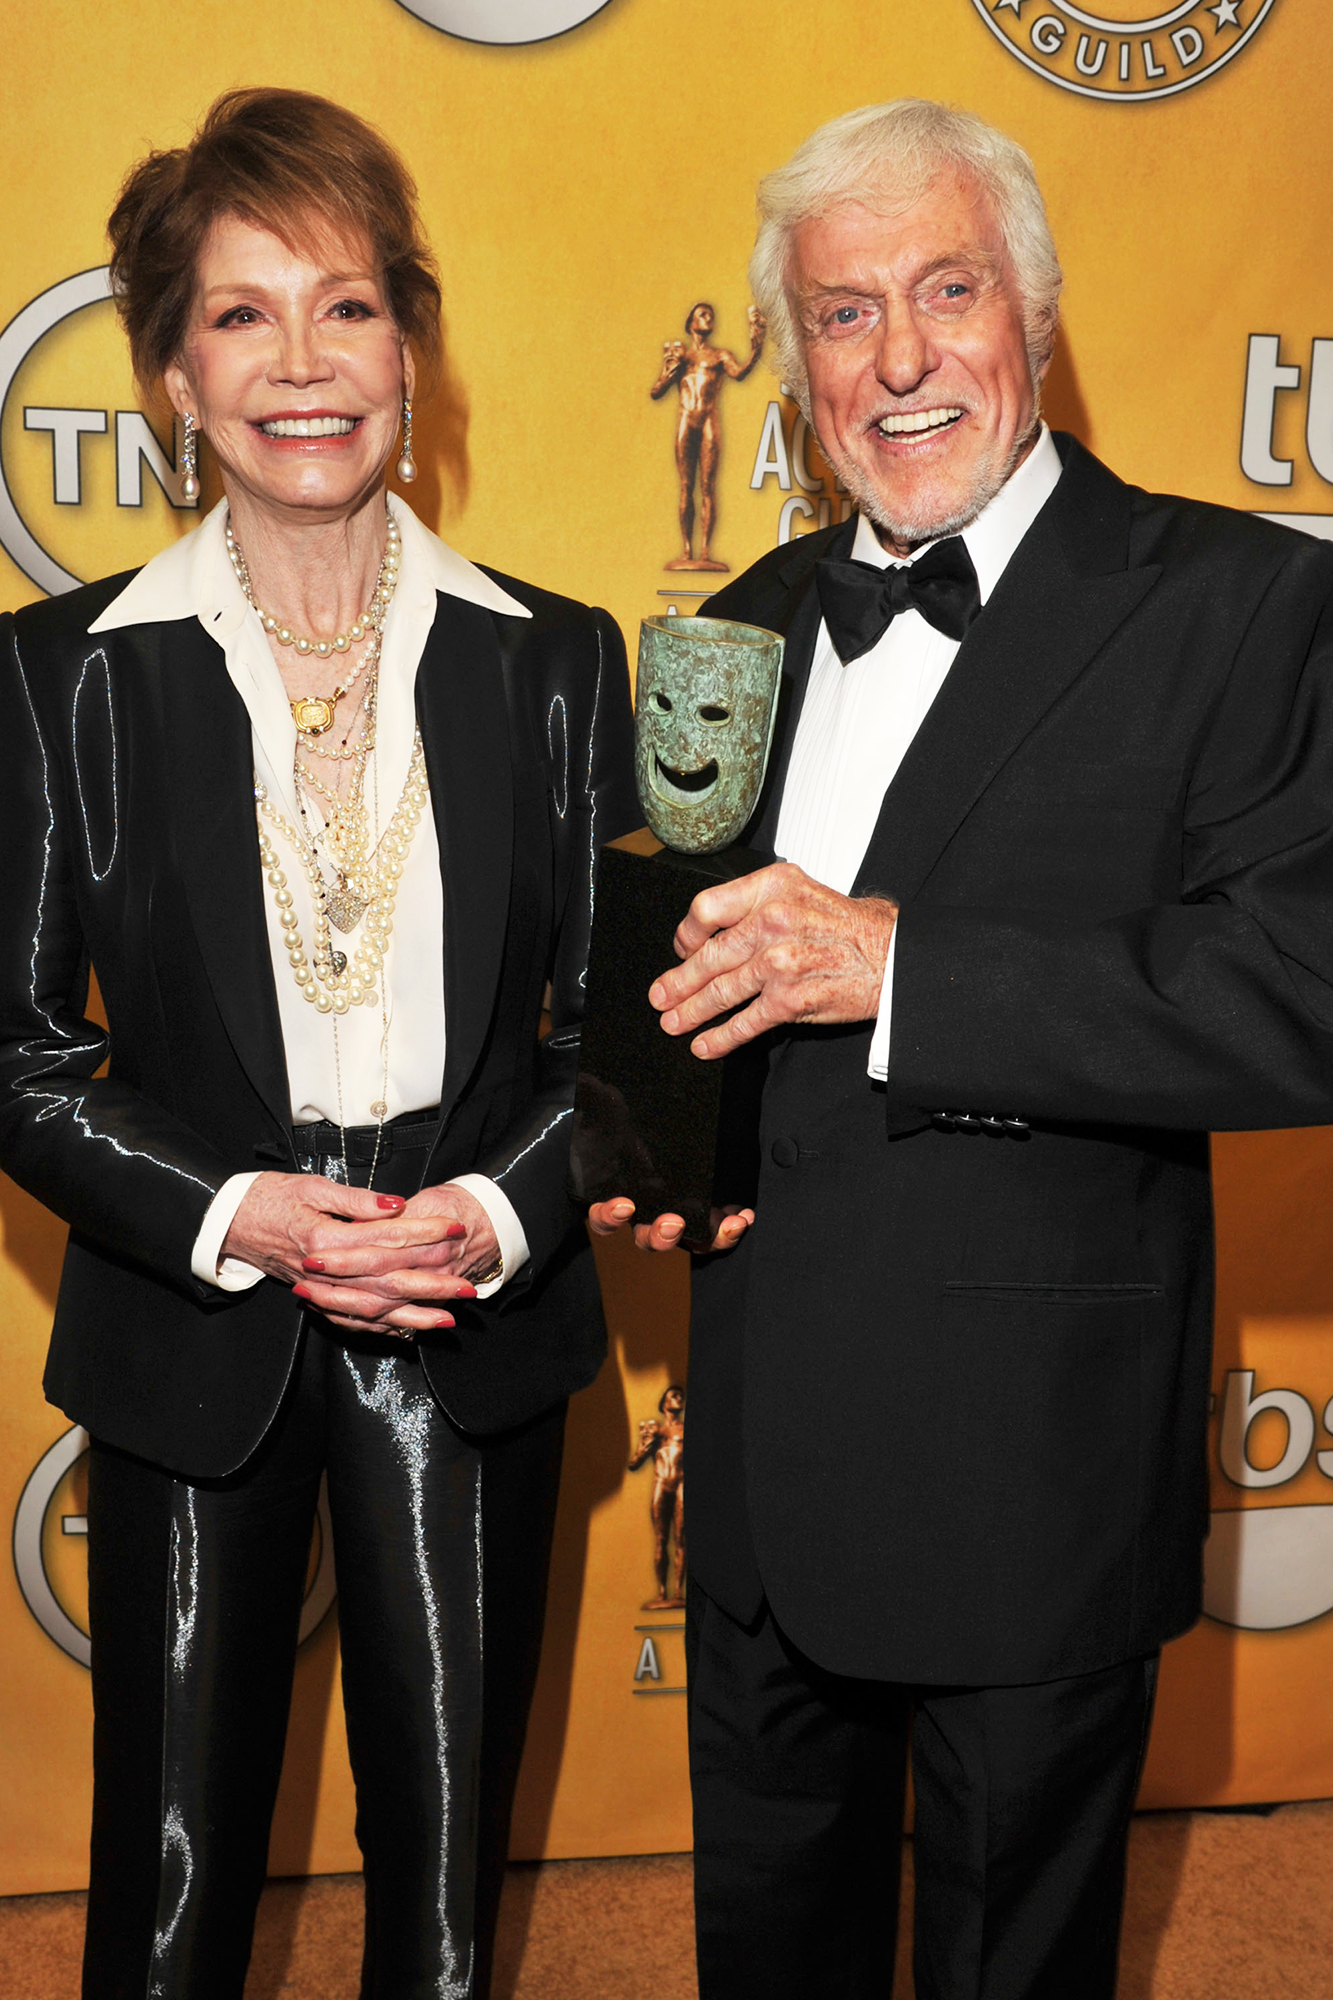 Mary Tyler Moore and Dick Van Dyke attend The 18th Annual Screen Actors Guild Awards, on Jan. 29, 2012 in Los Angeles.